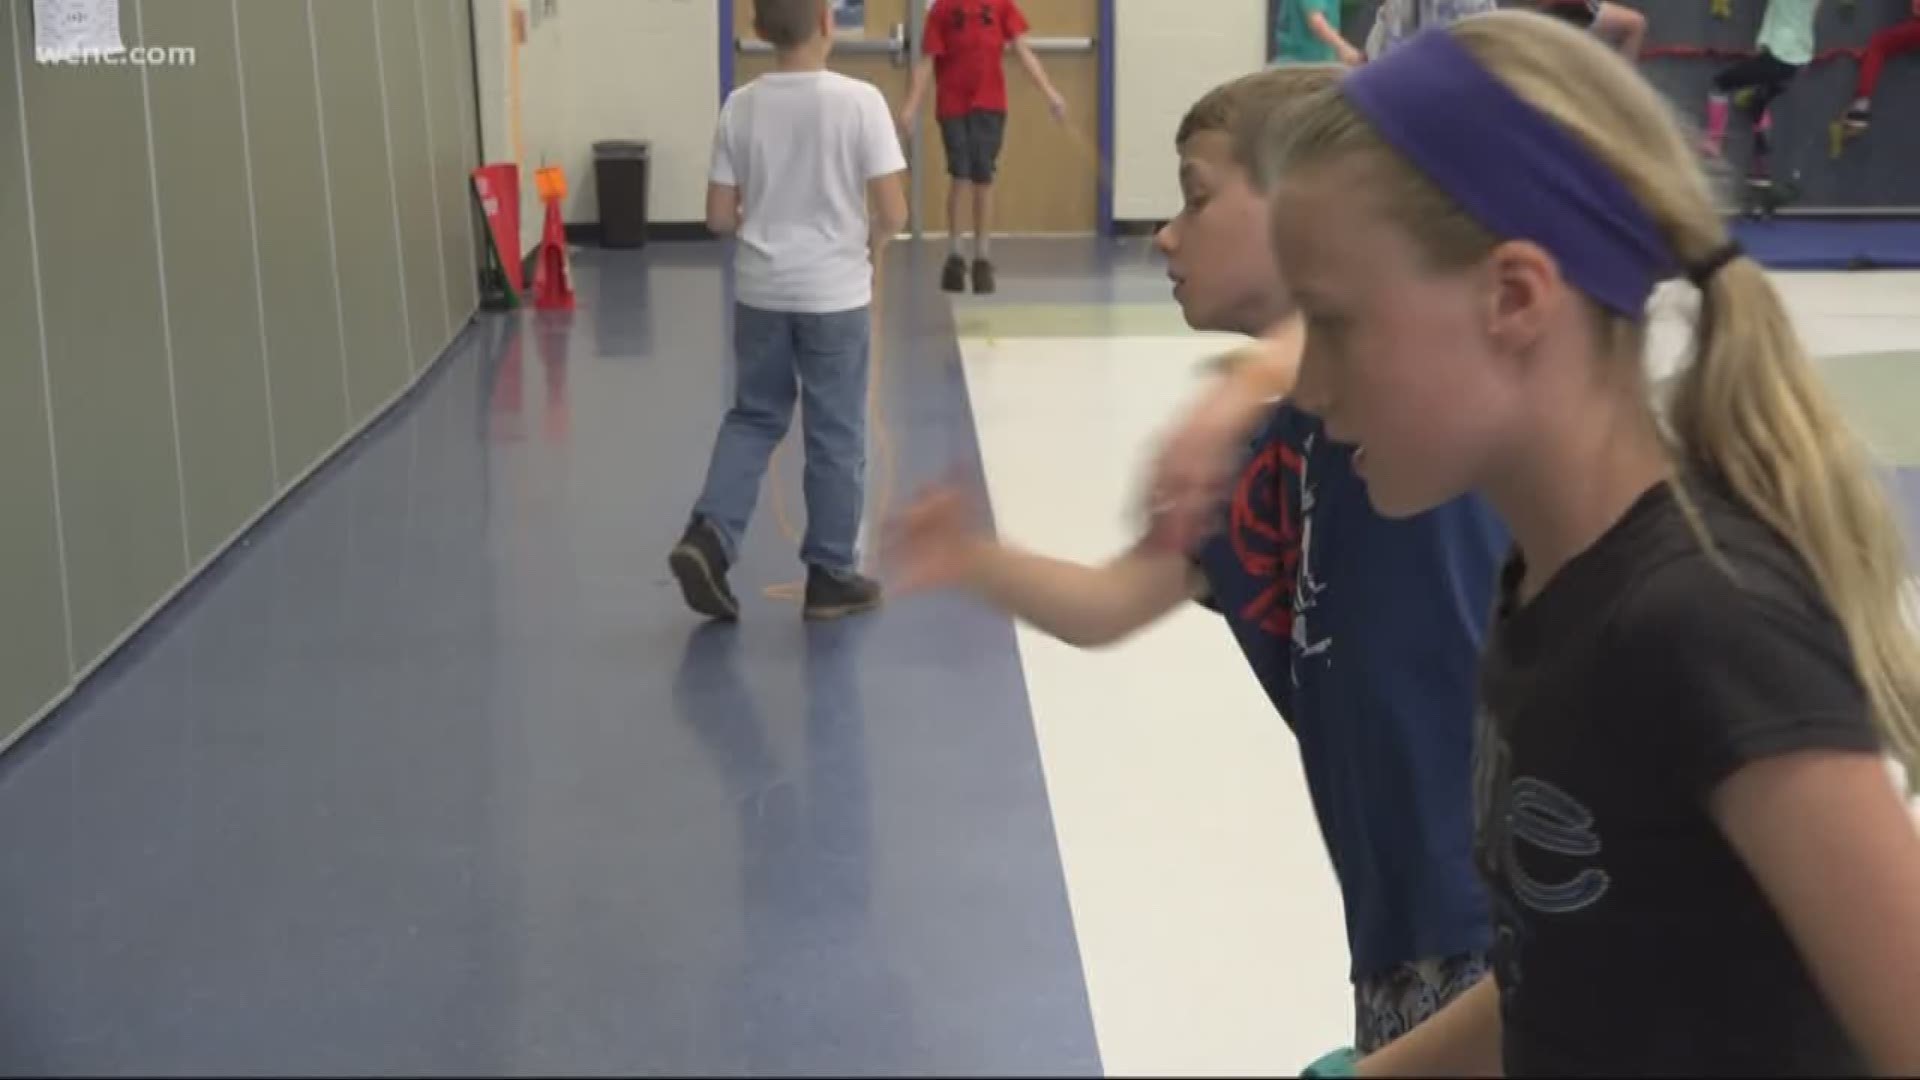 'Brain breaks' are benefiting some students